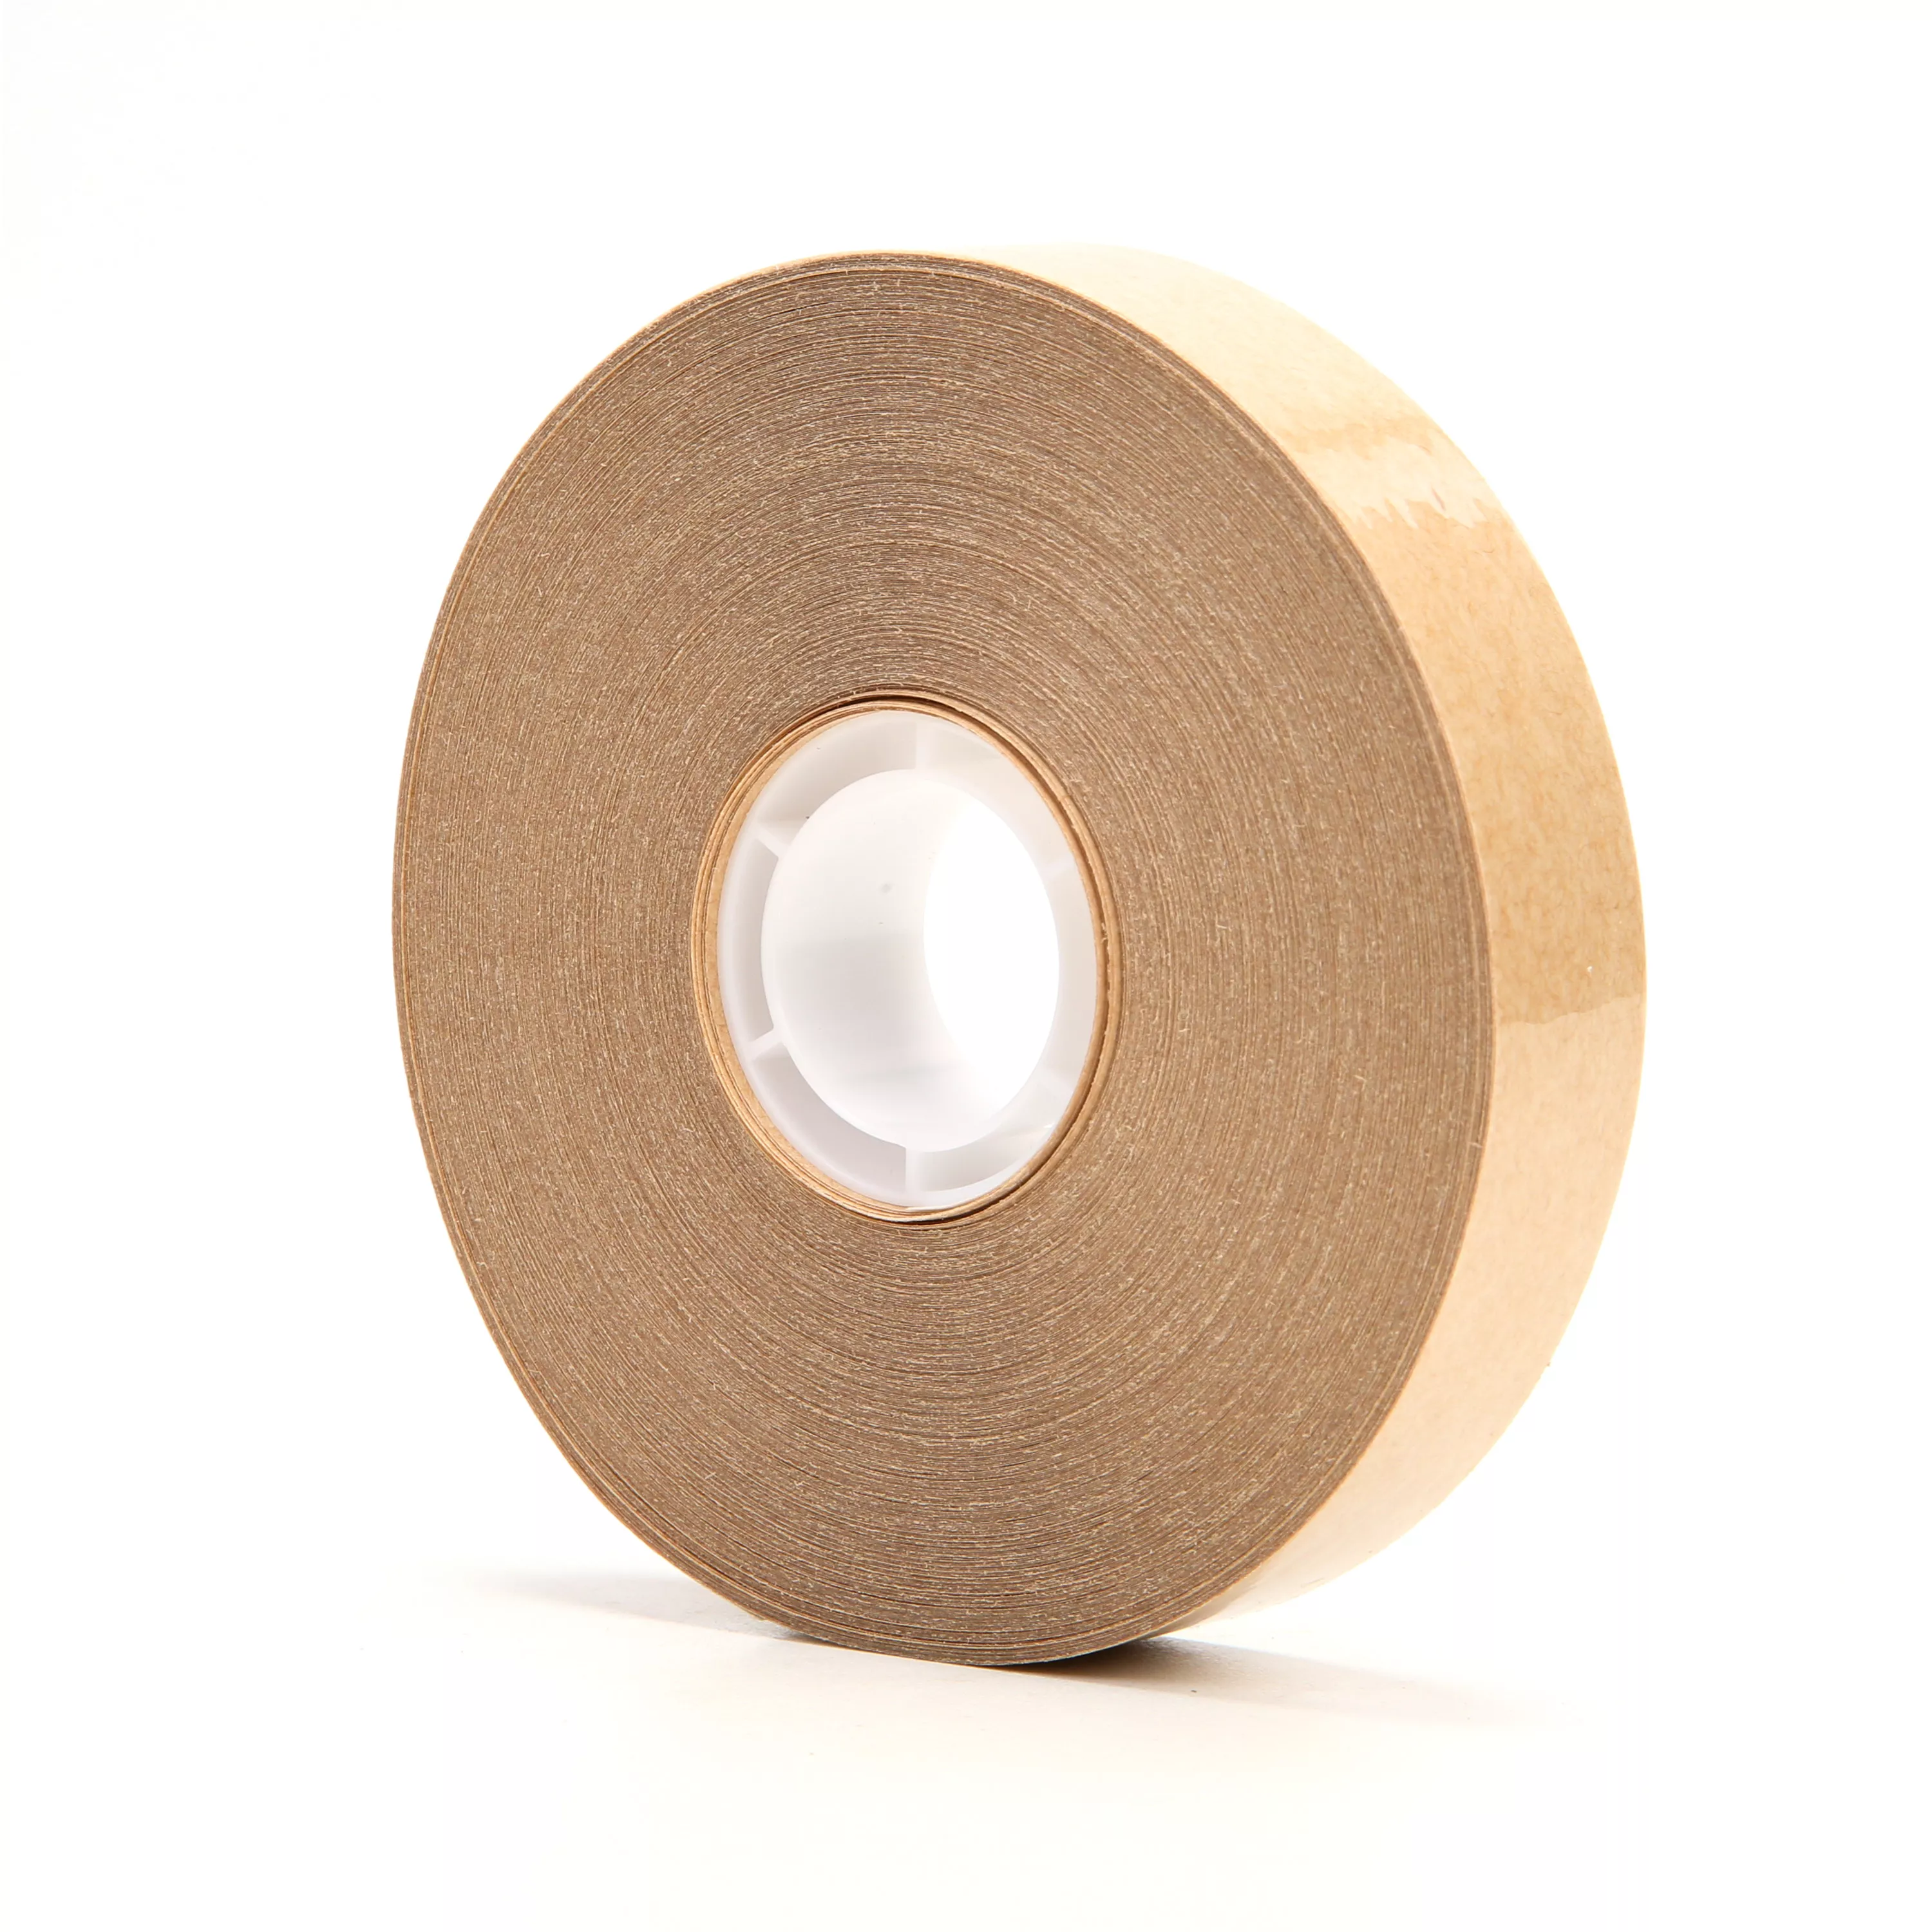 3M™ ATG Adhesive Transfer Tape 987, Clear, 3/4 in x 60 yd, 1.7 mil, (12
Roll/Carton) 48 Roll/Case